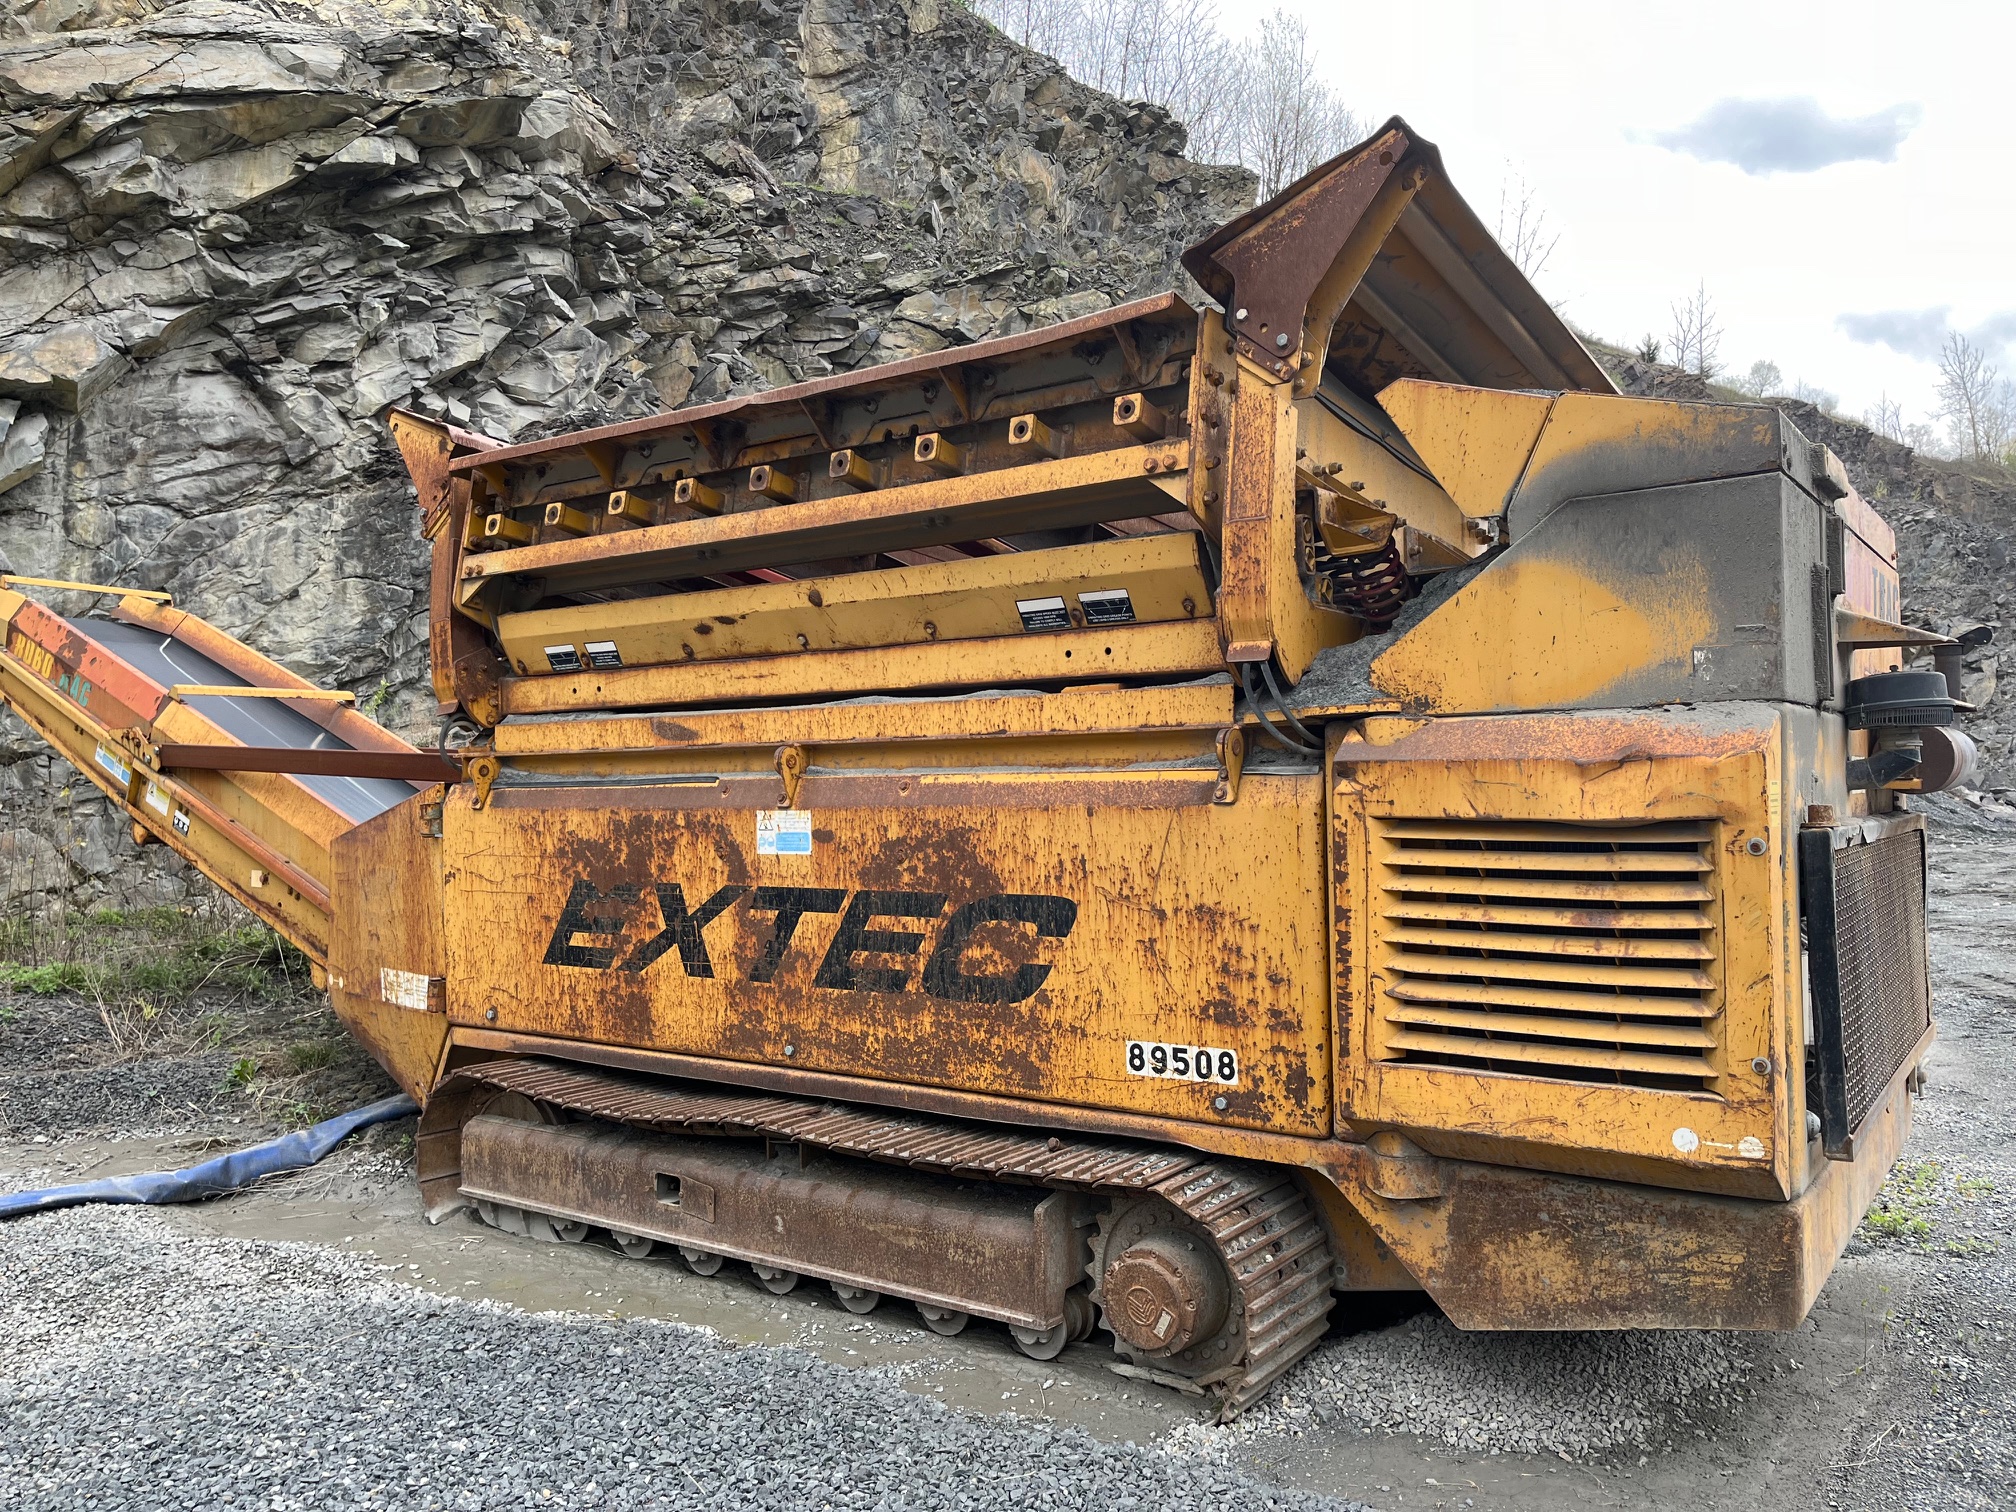 Extec Robotrac Mobile Screener. 2008 year model. BMF 1012 4 cylinder Deutz water cooled 111 horsepower diesel engine with 3,444 hours. Heavy duty mobile vibrating screen scalping sifter. The machine is 36' feet 11" inches long by 8' feet 6" inches wide and 10' feet 11" inches high. Screen width is 8' feet 6" inches and screen length is 10' feet 17" inches. Belt width is 39" inches and the feeder conveyor width is 47" inches. Discharge conveyor height is 11' feet. The unit is remote controlled and has been engineered to process approximately 800 tons per hr.